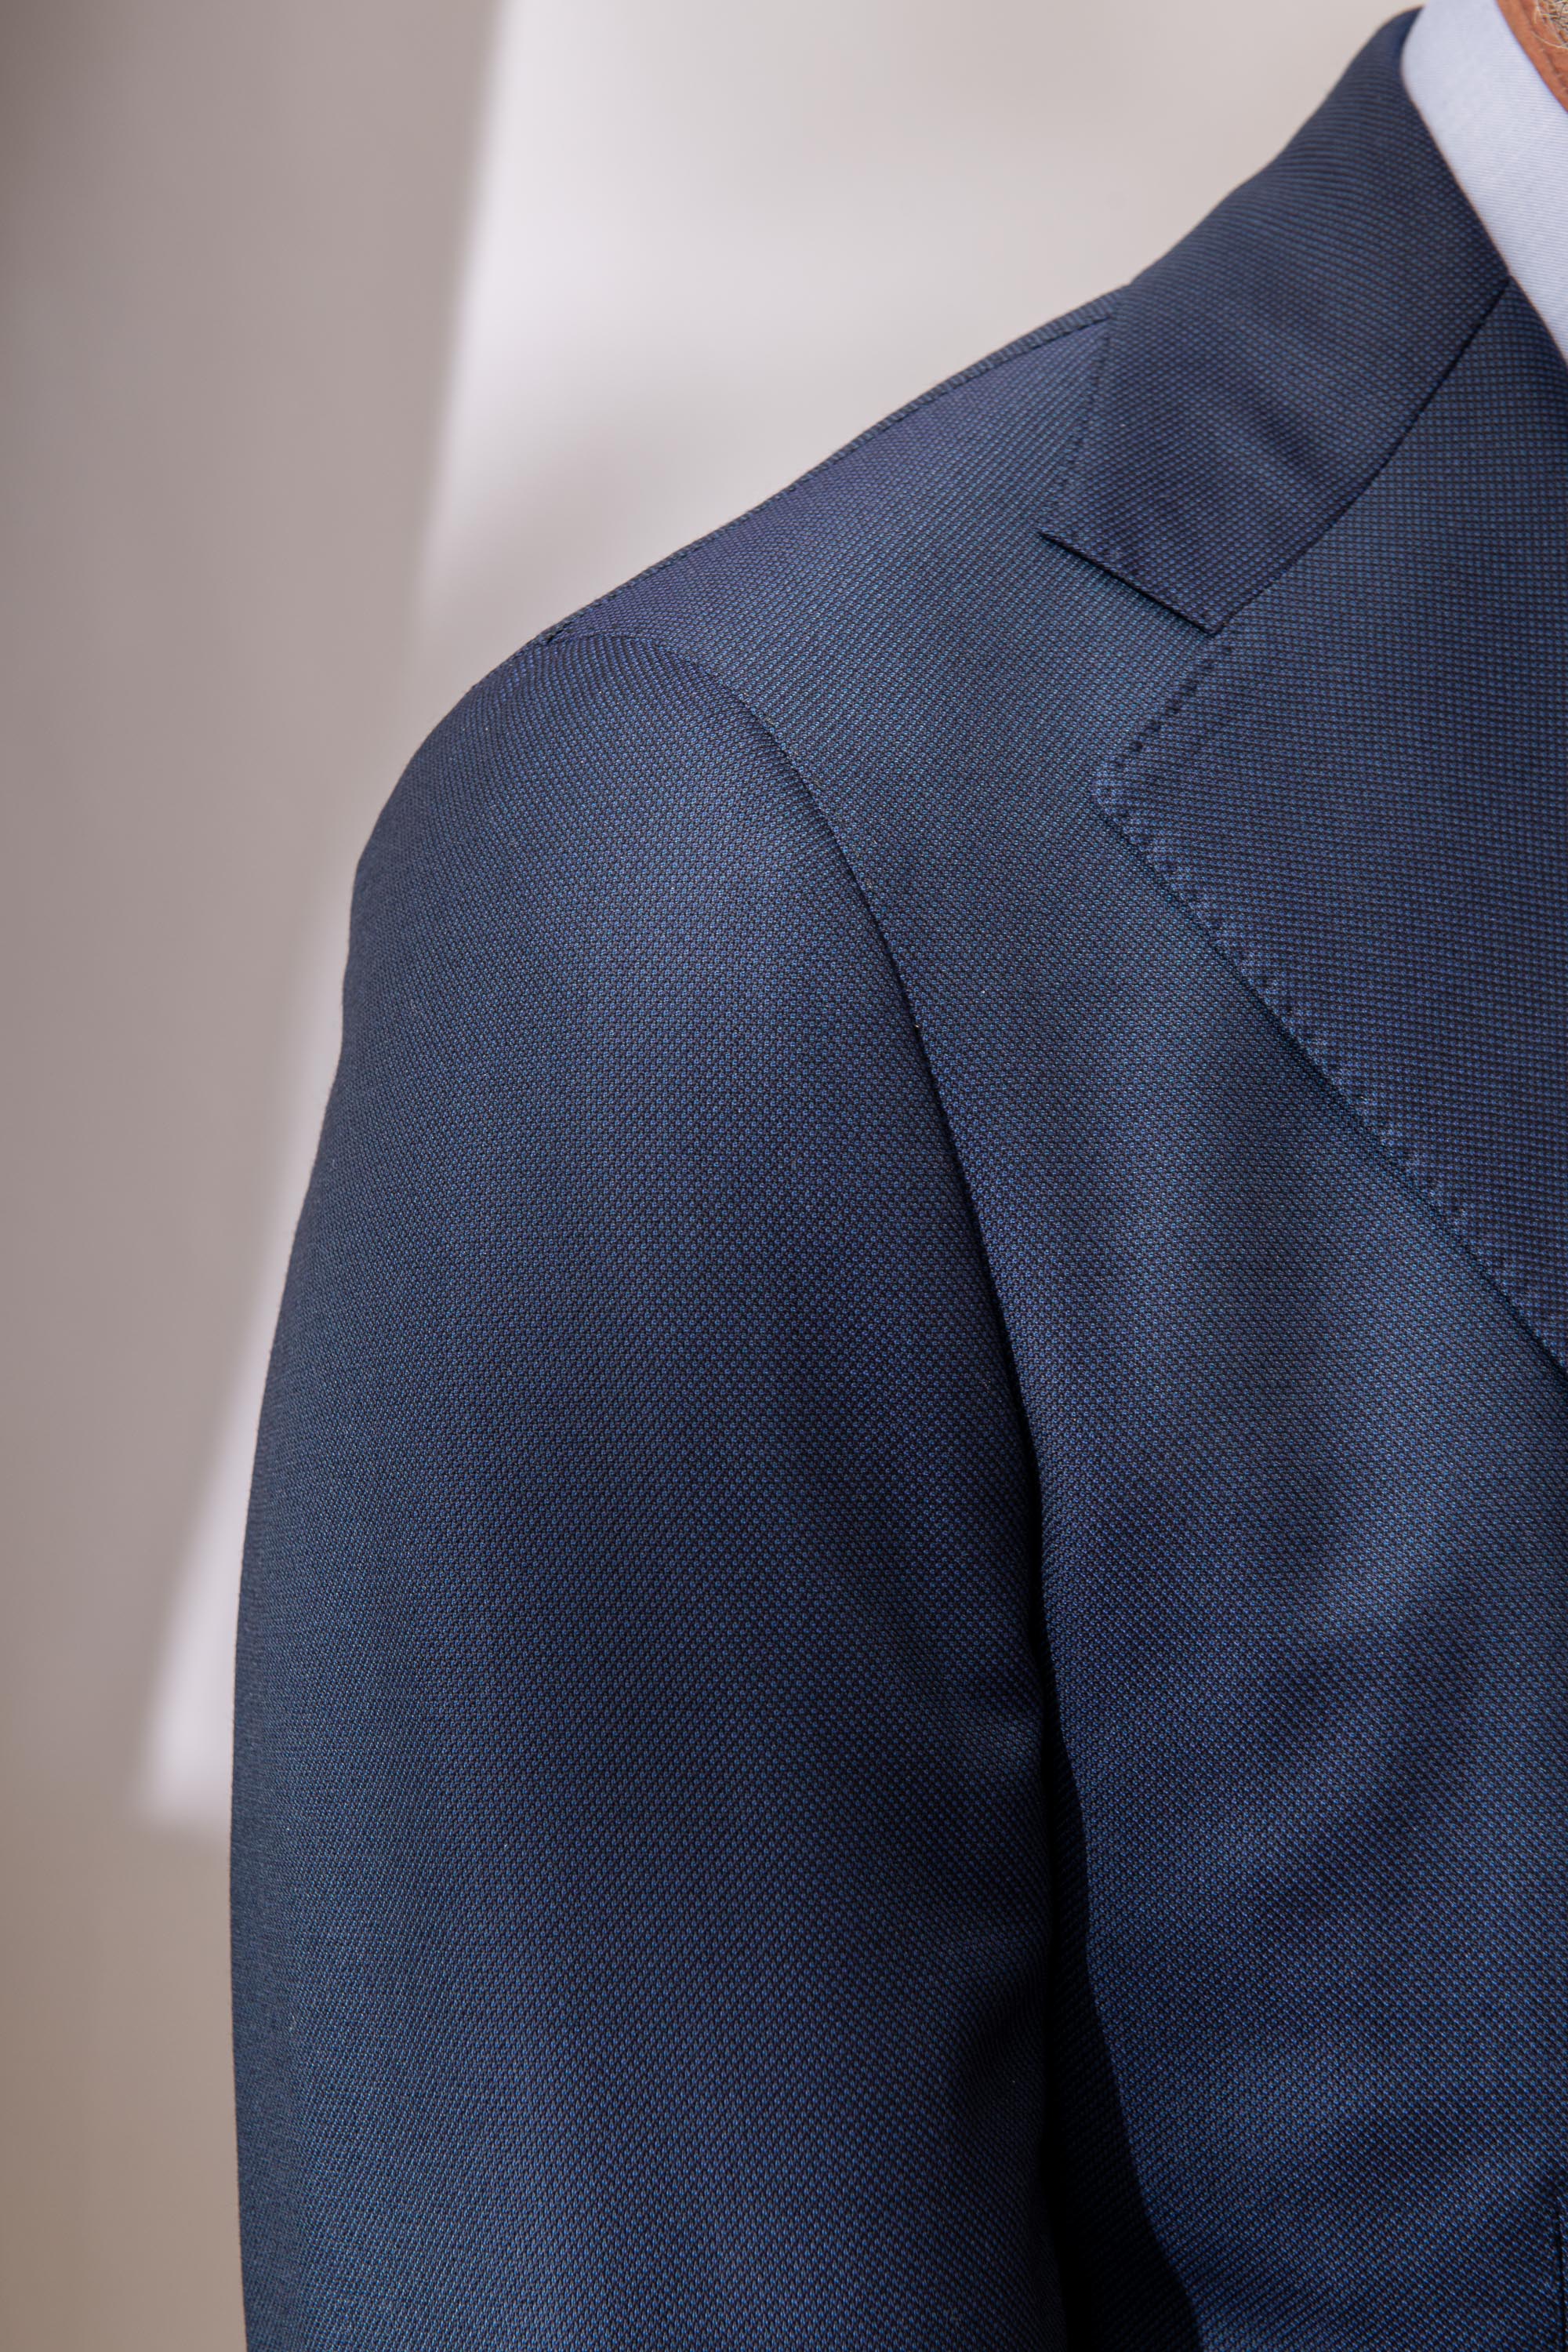 BLUE BIRD'S EYE SUIT With Side Adjuster - Made in Italy - Pini Parma